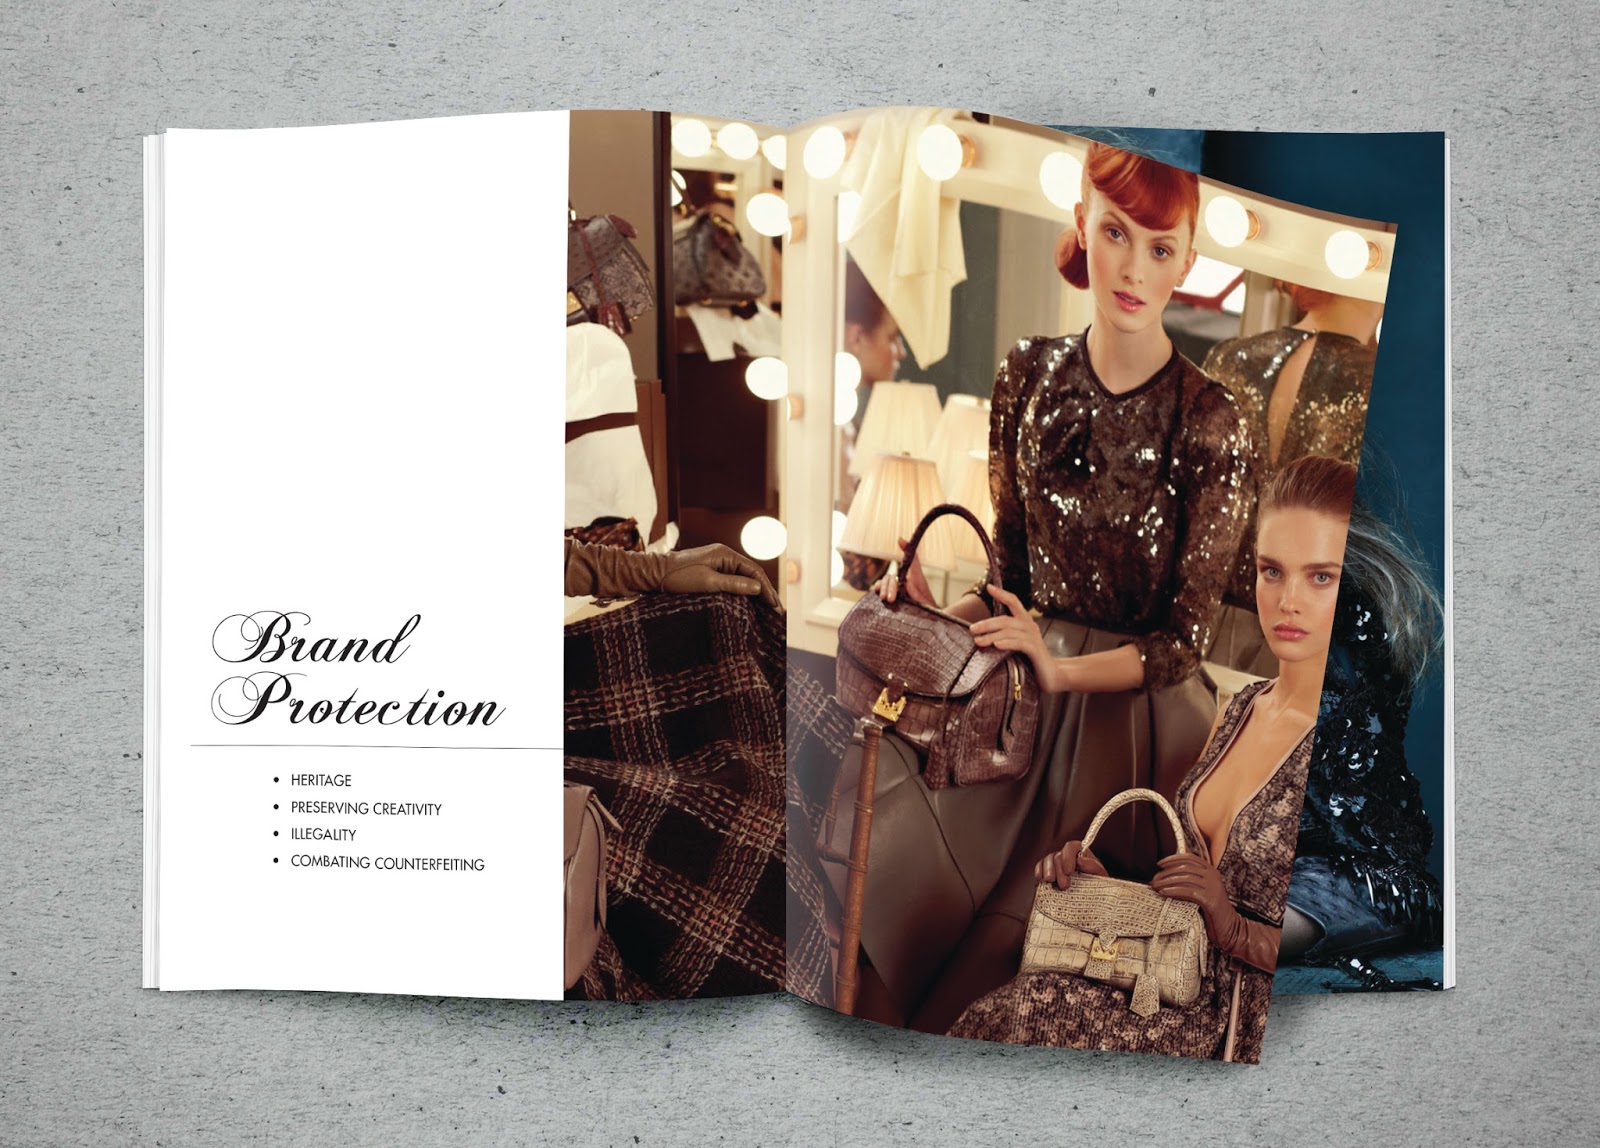 vuitton brand protection